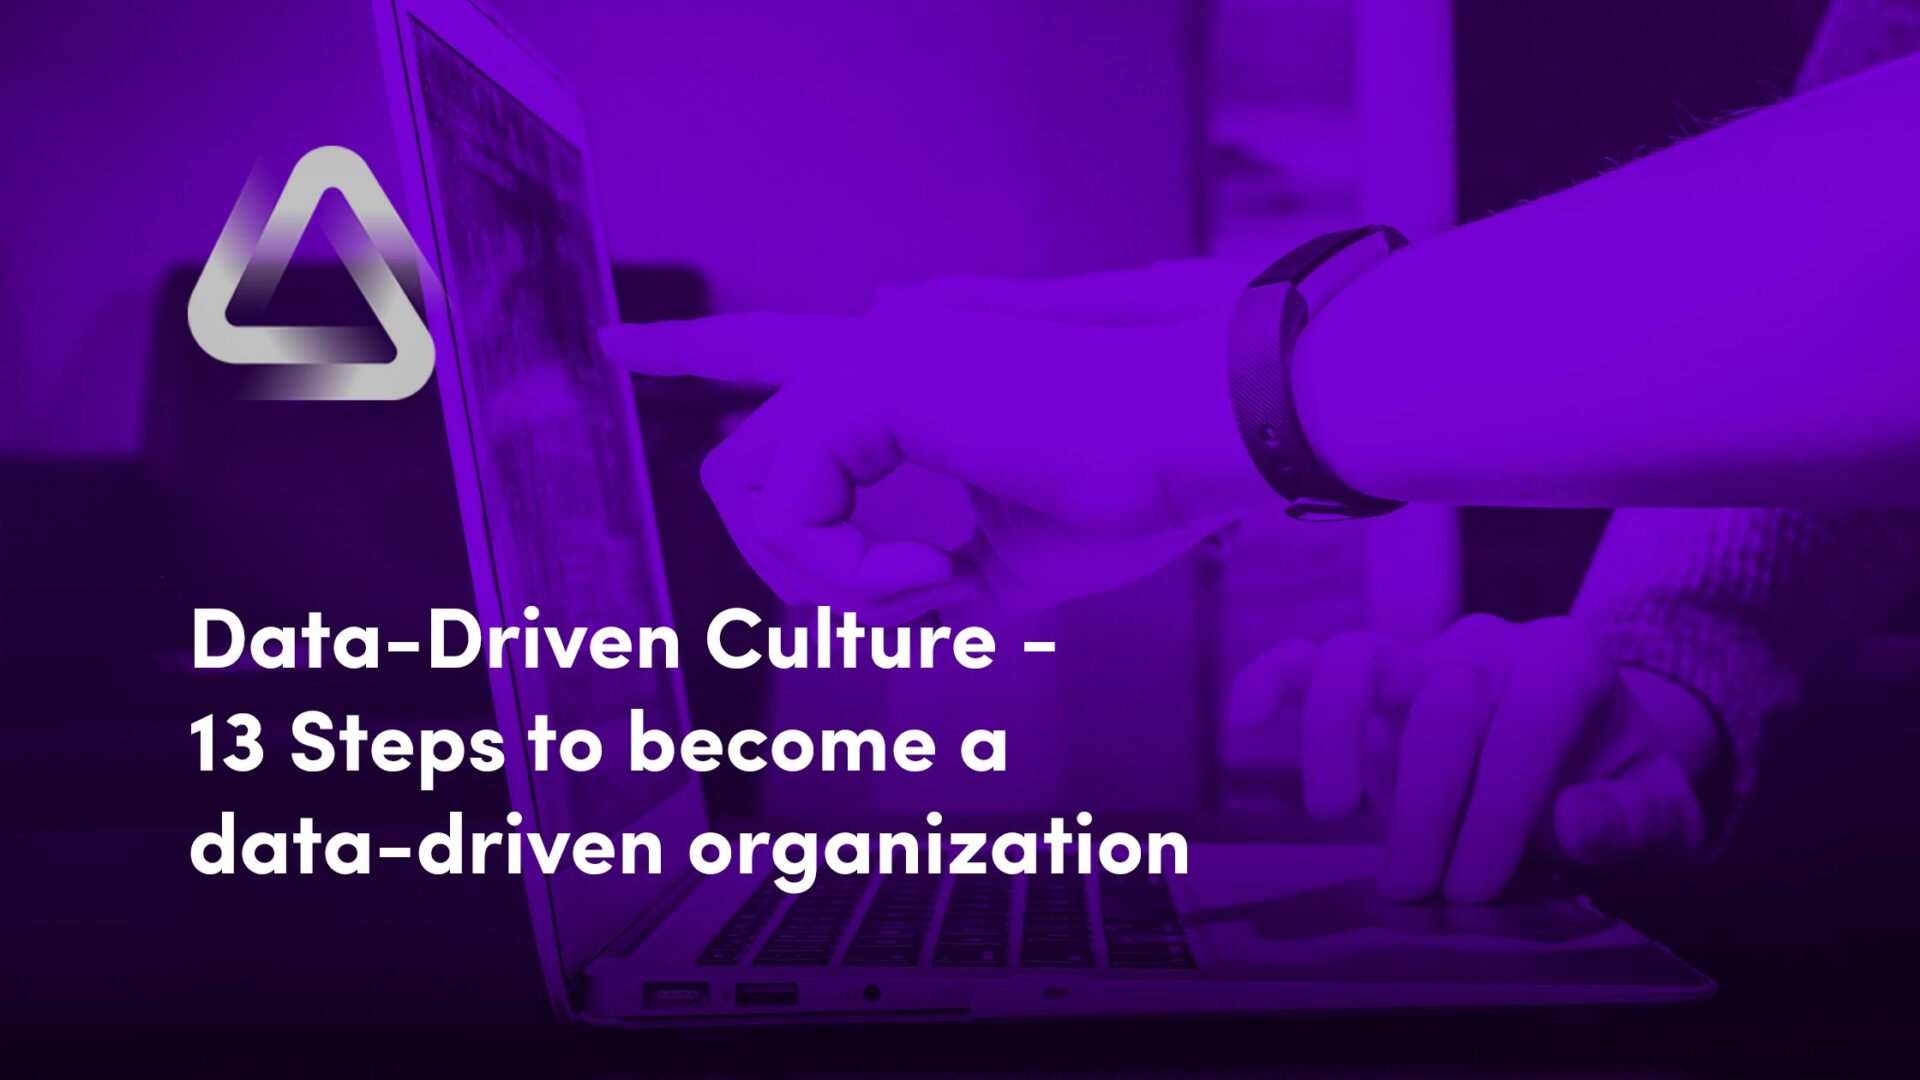 13 Steps for creating a Data-Driven Culture - Become a data and analytics driven business